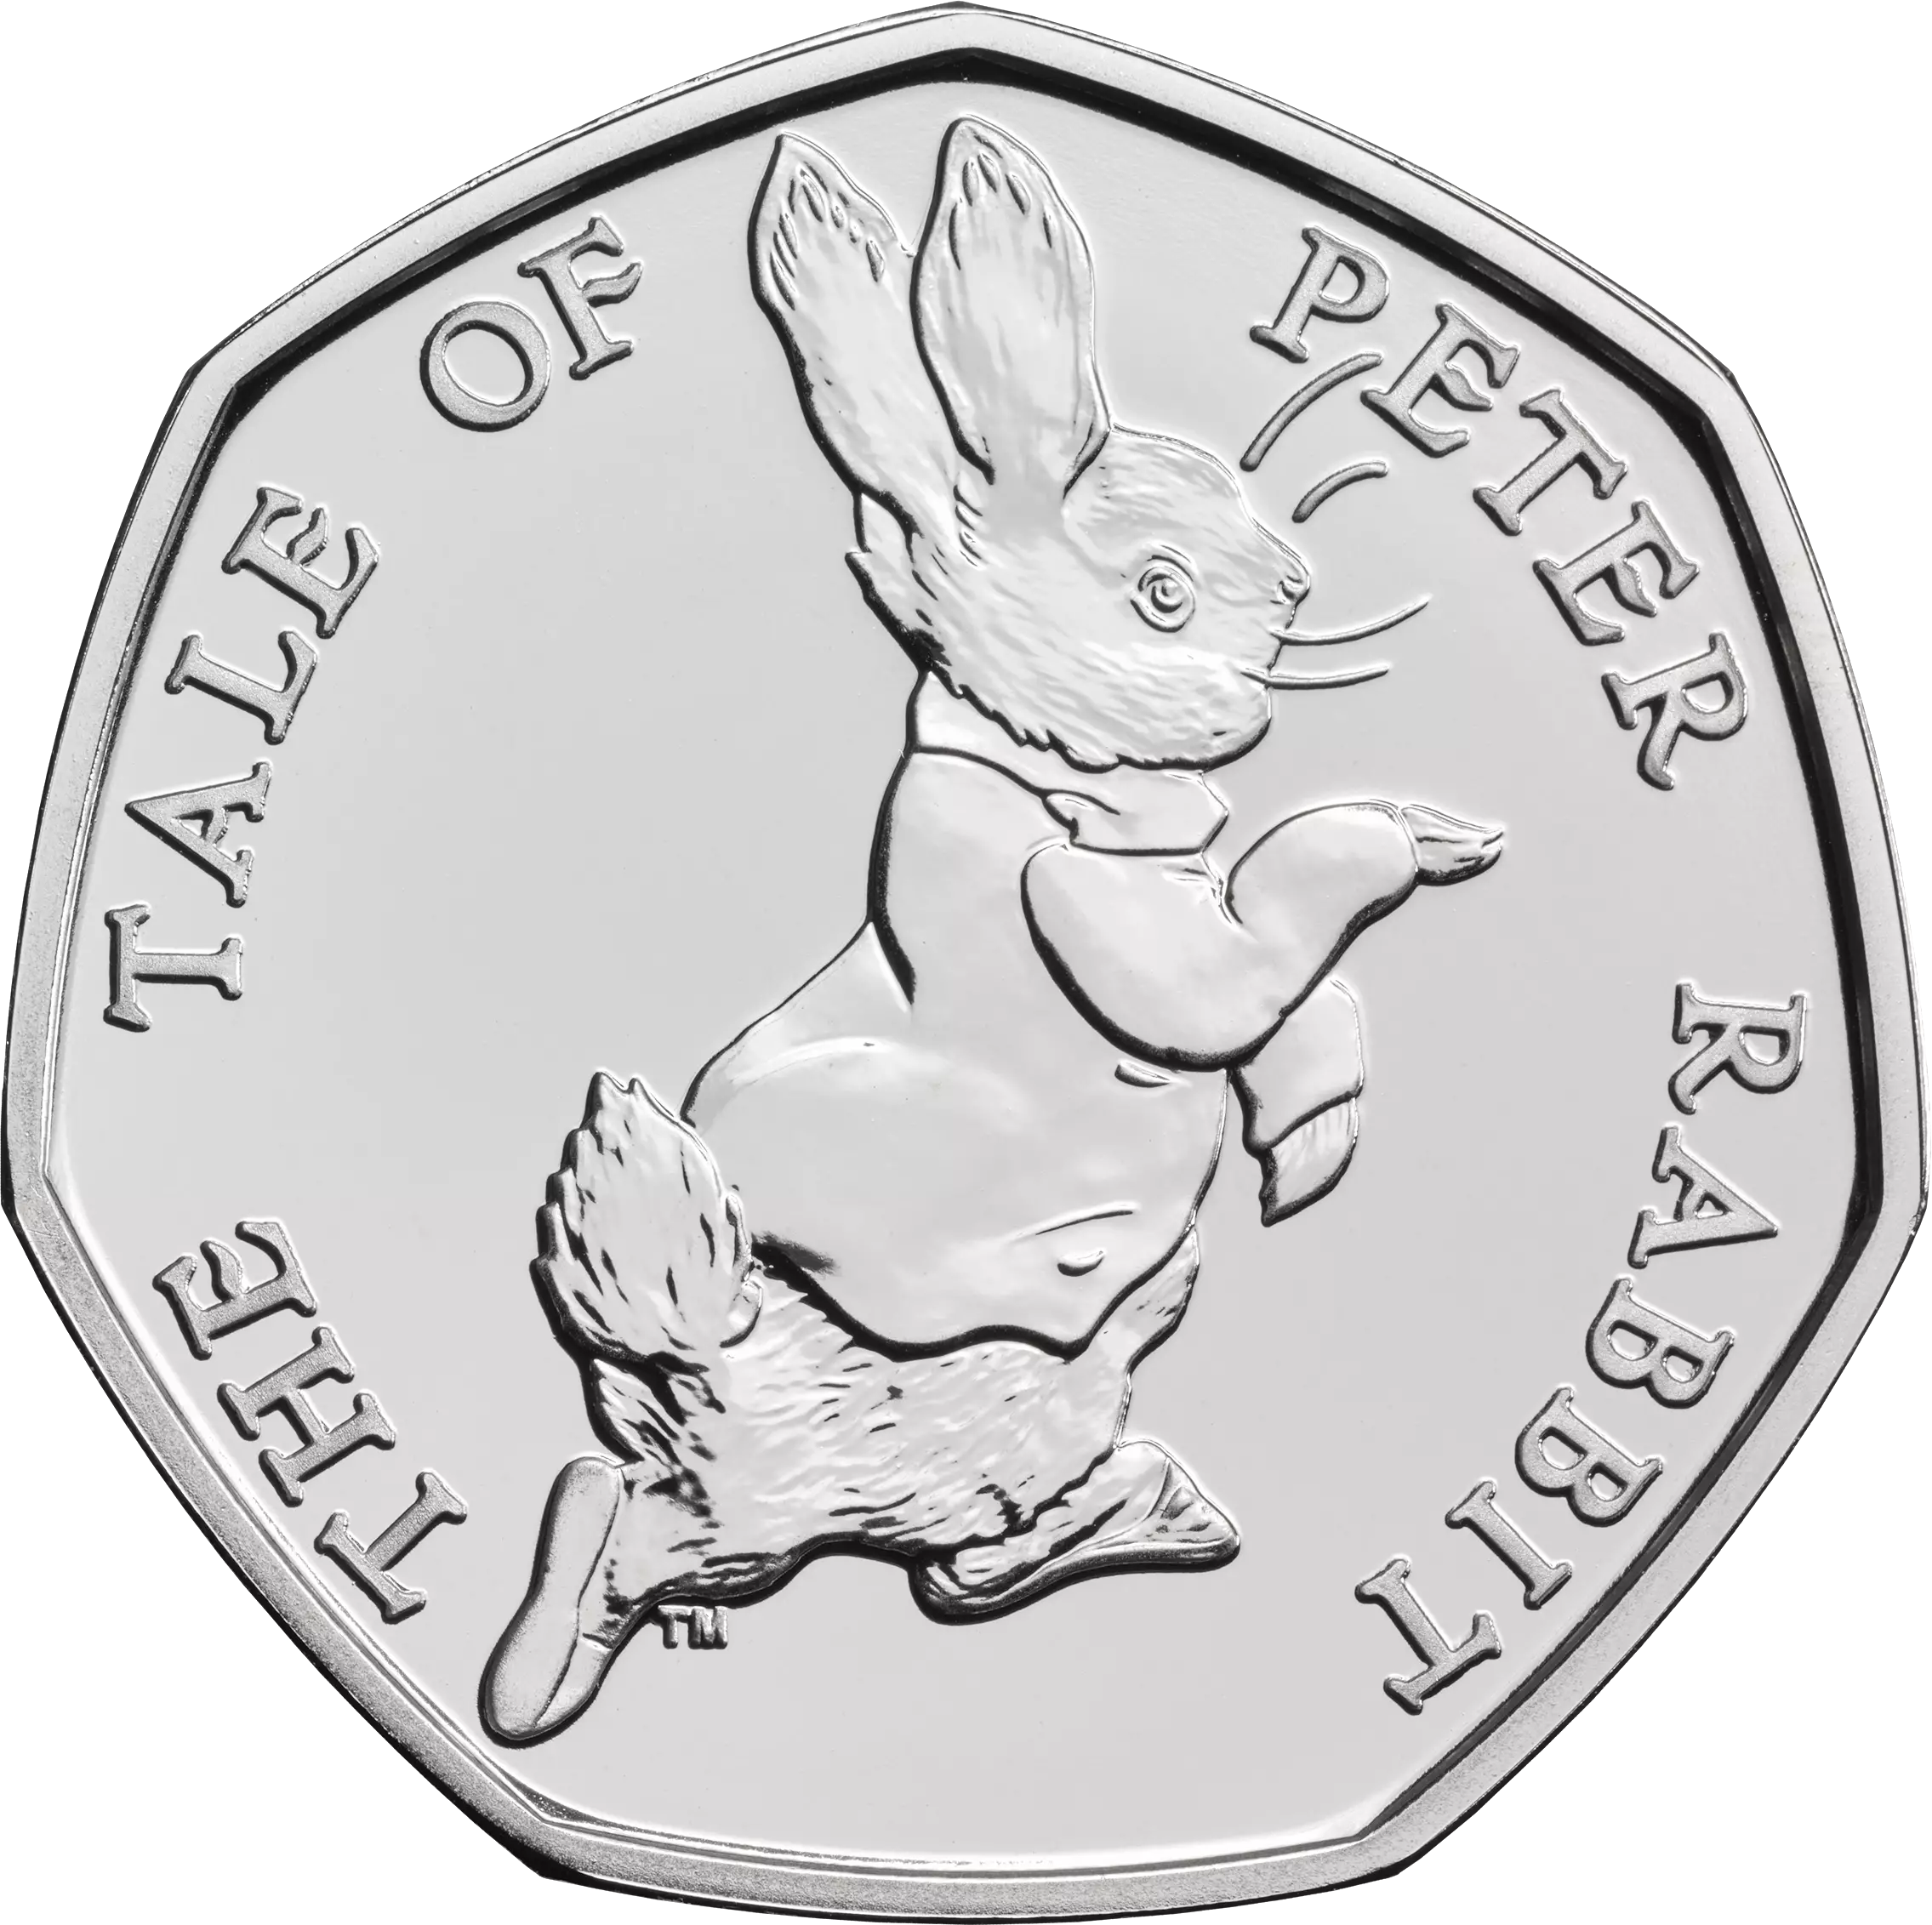 The Peter Rabbit coin is the 6th rarest 50p piece.